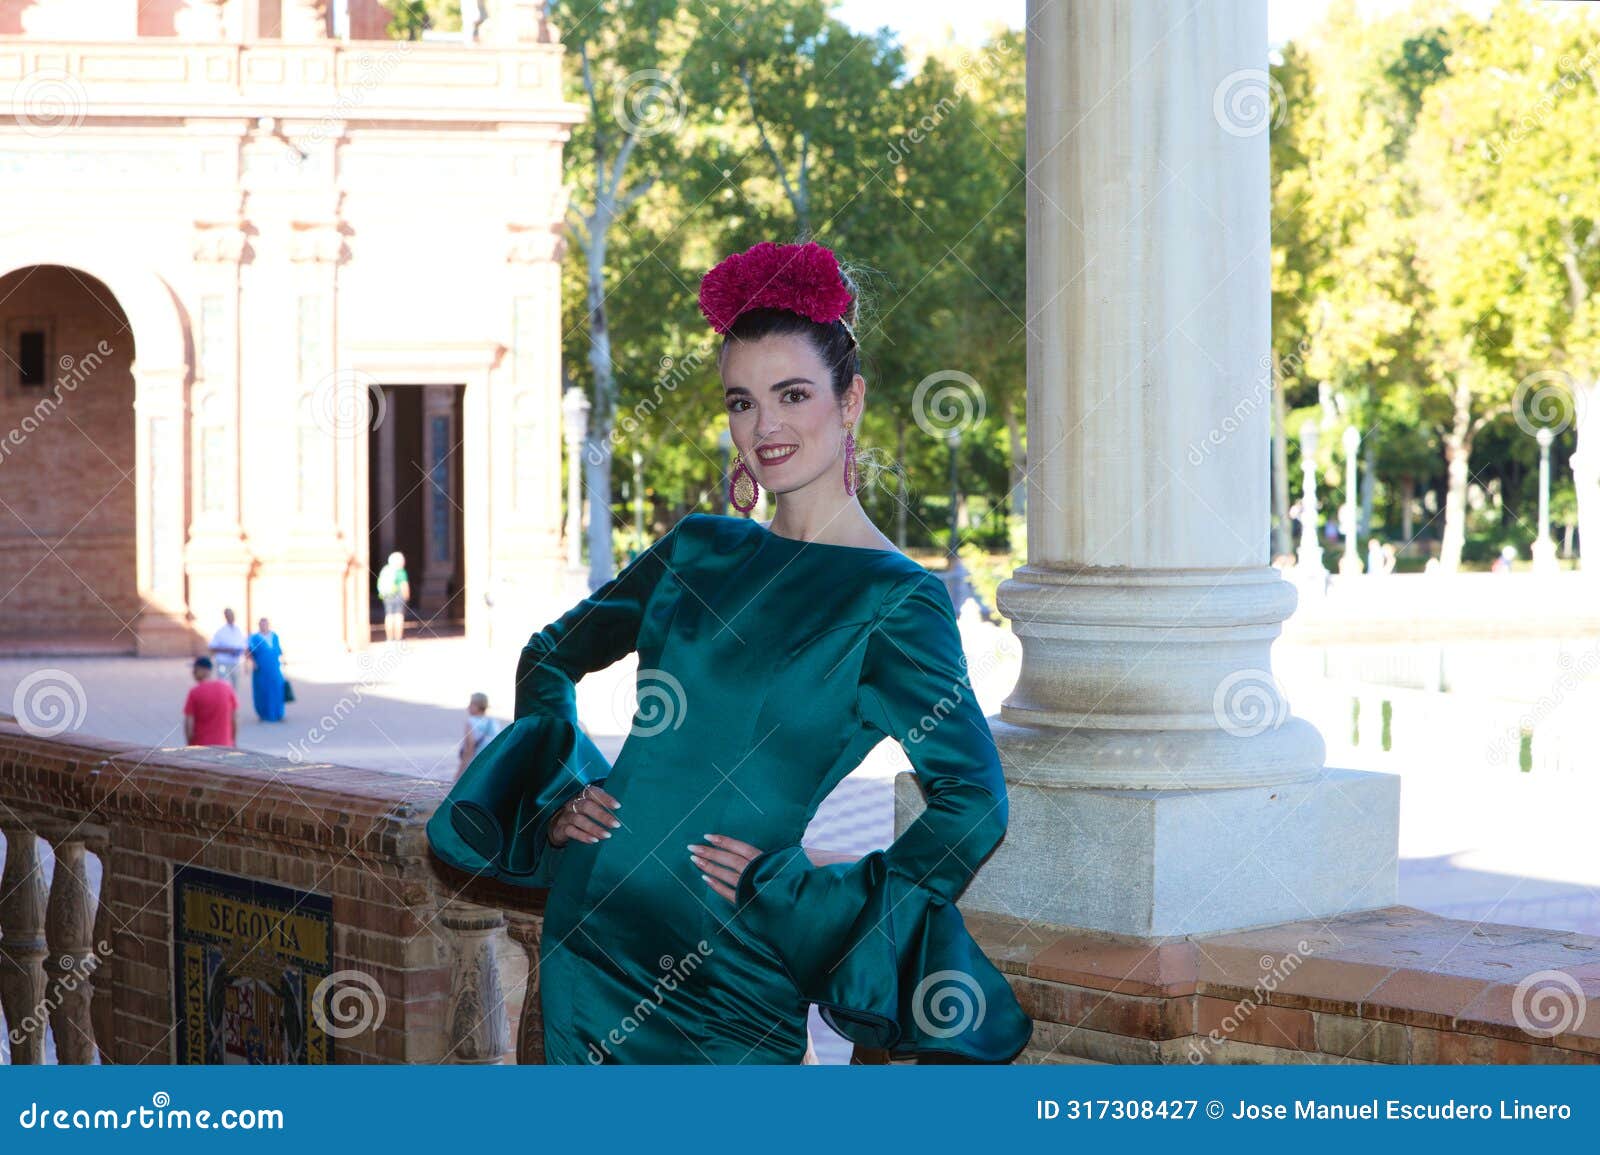 beautiful young woman with typical green frilly dress and dancing flamenco in plaza de espana in sevilla, andalusia, she is on a